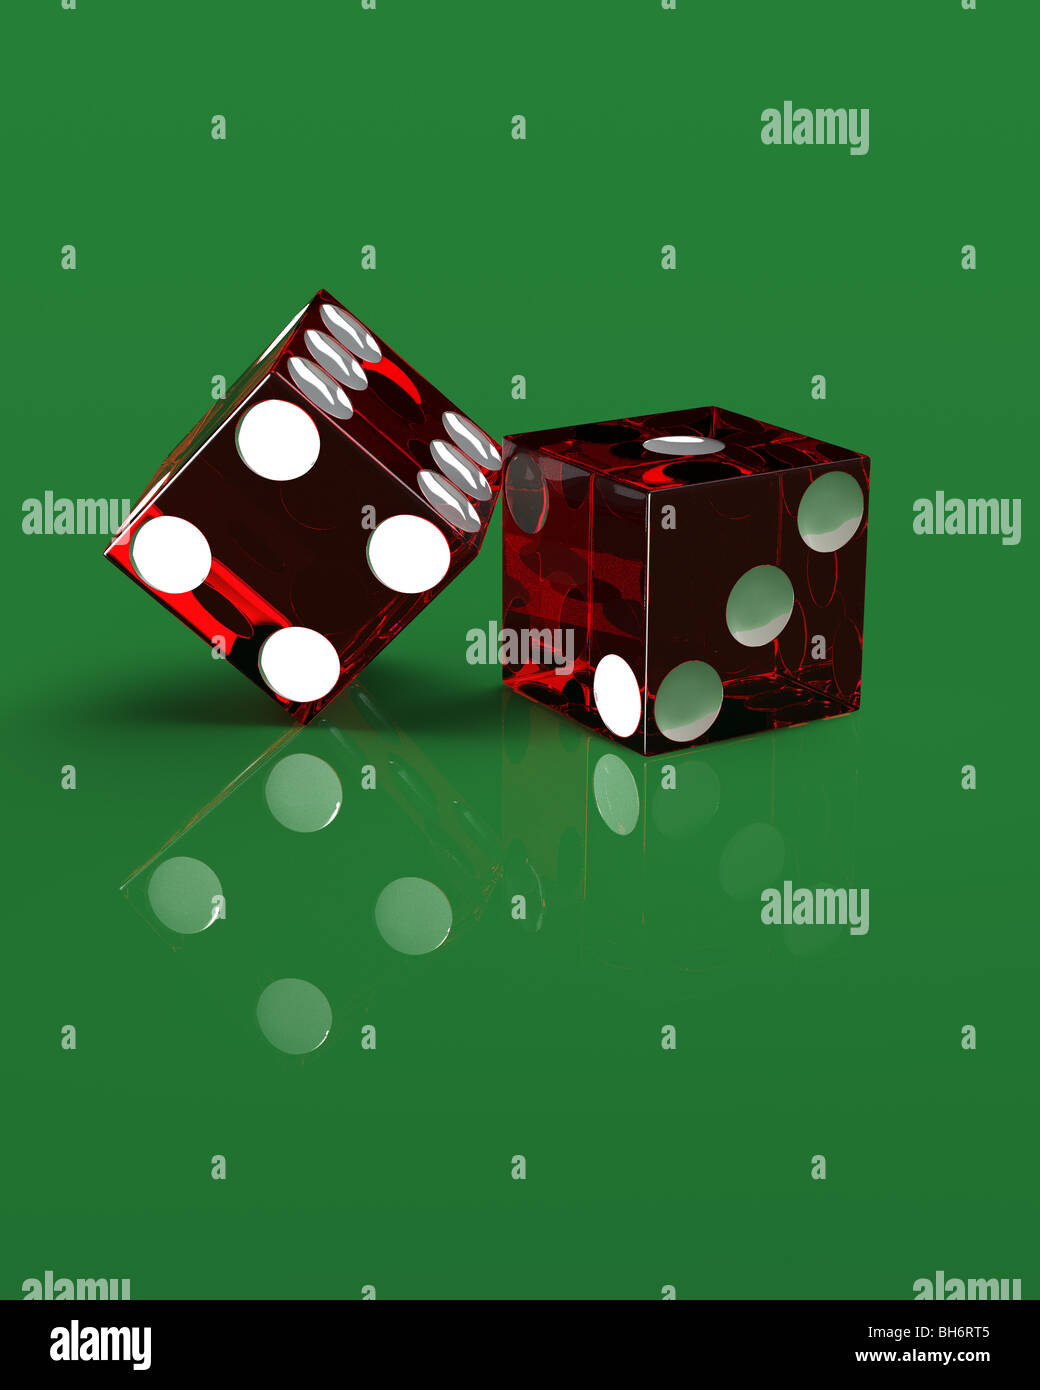 3D-render of two right handed red transparent casino dice on a green, reflective surface. Stock Photo